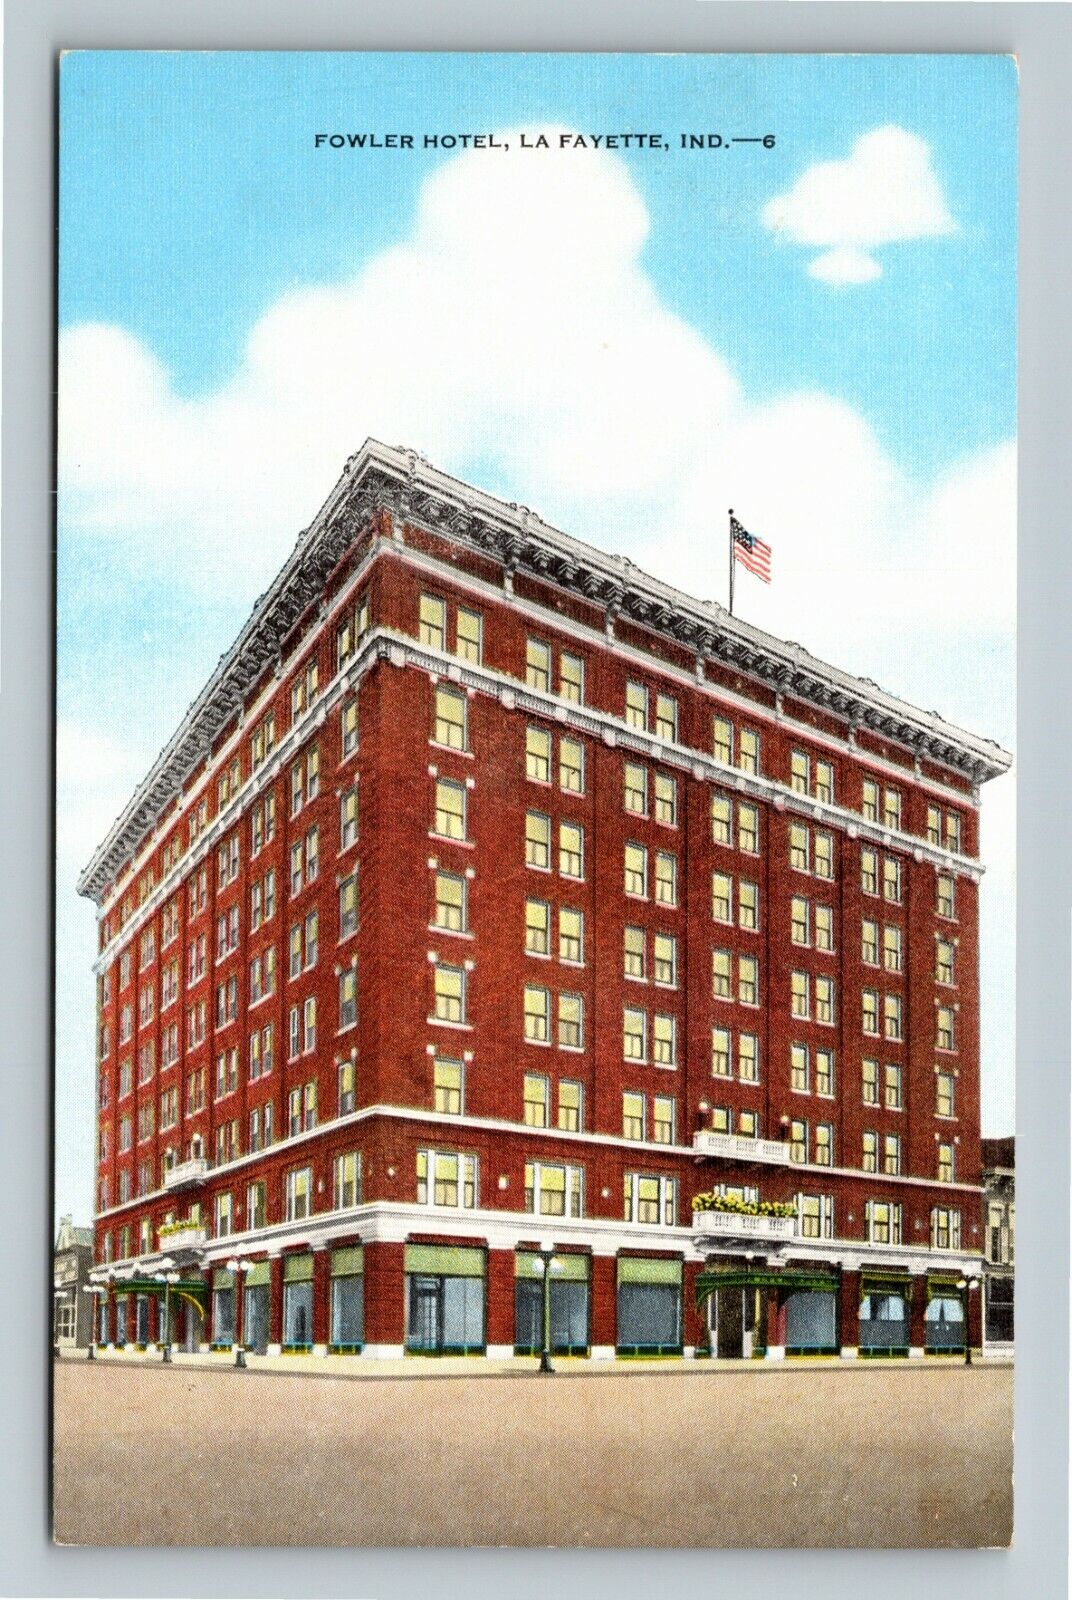 Lafayette IN-Indiana, Fowler Hotel, Exterior, Vintage Postcard